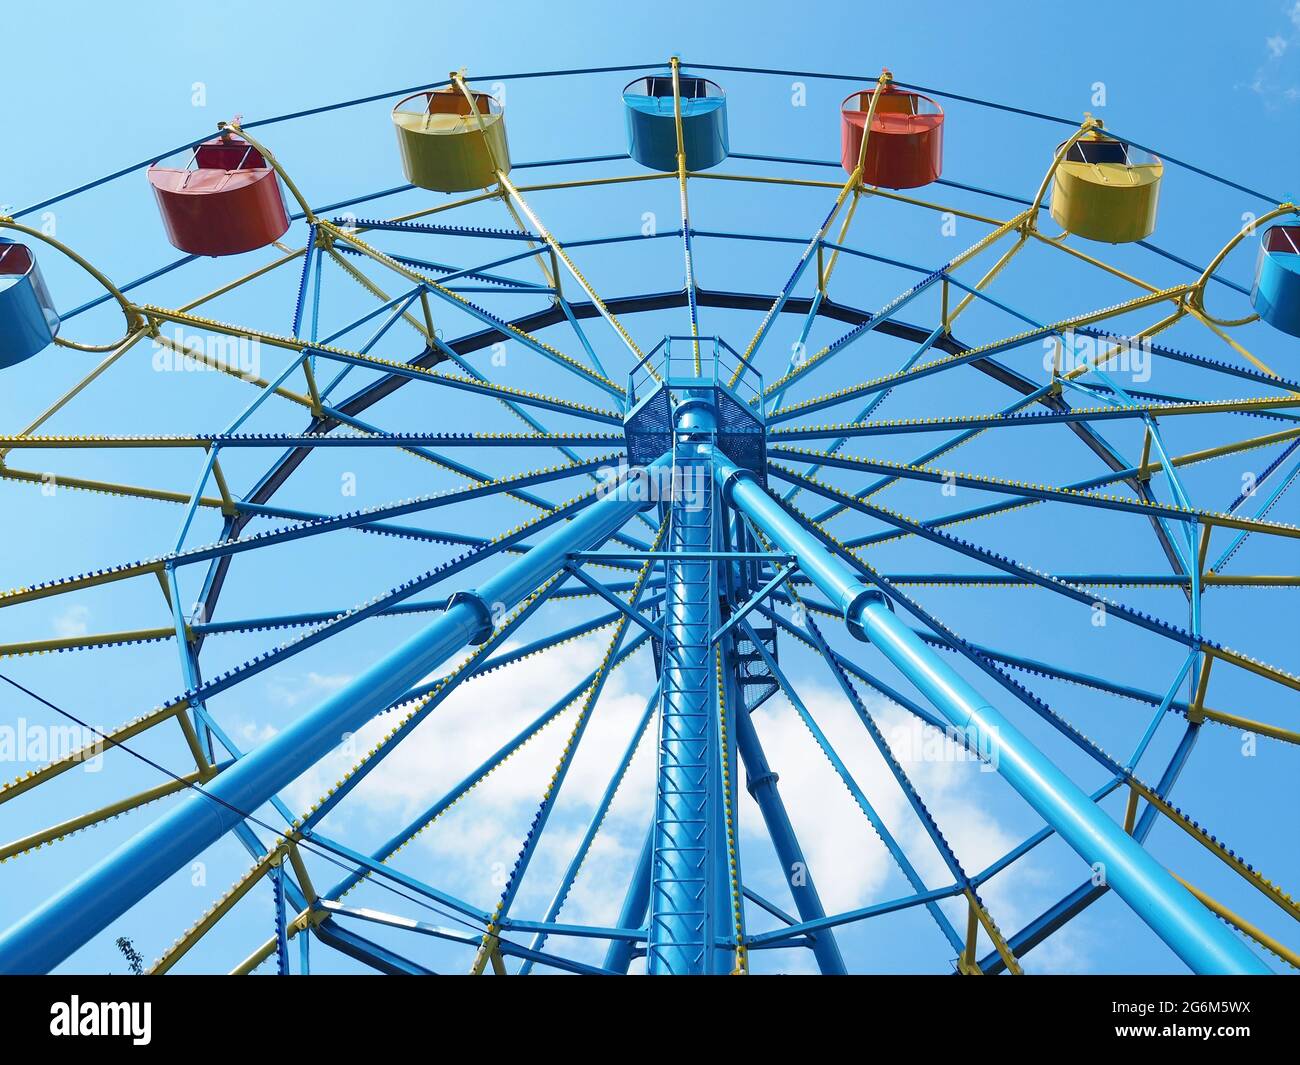 Multicolored open cabins on a ferris wheel close up Stock Photo